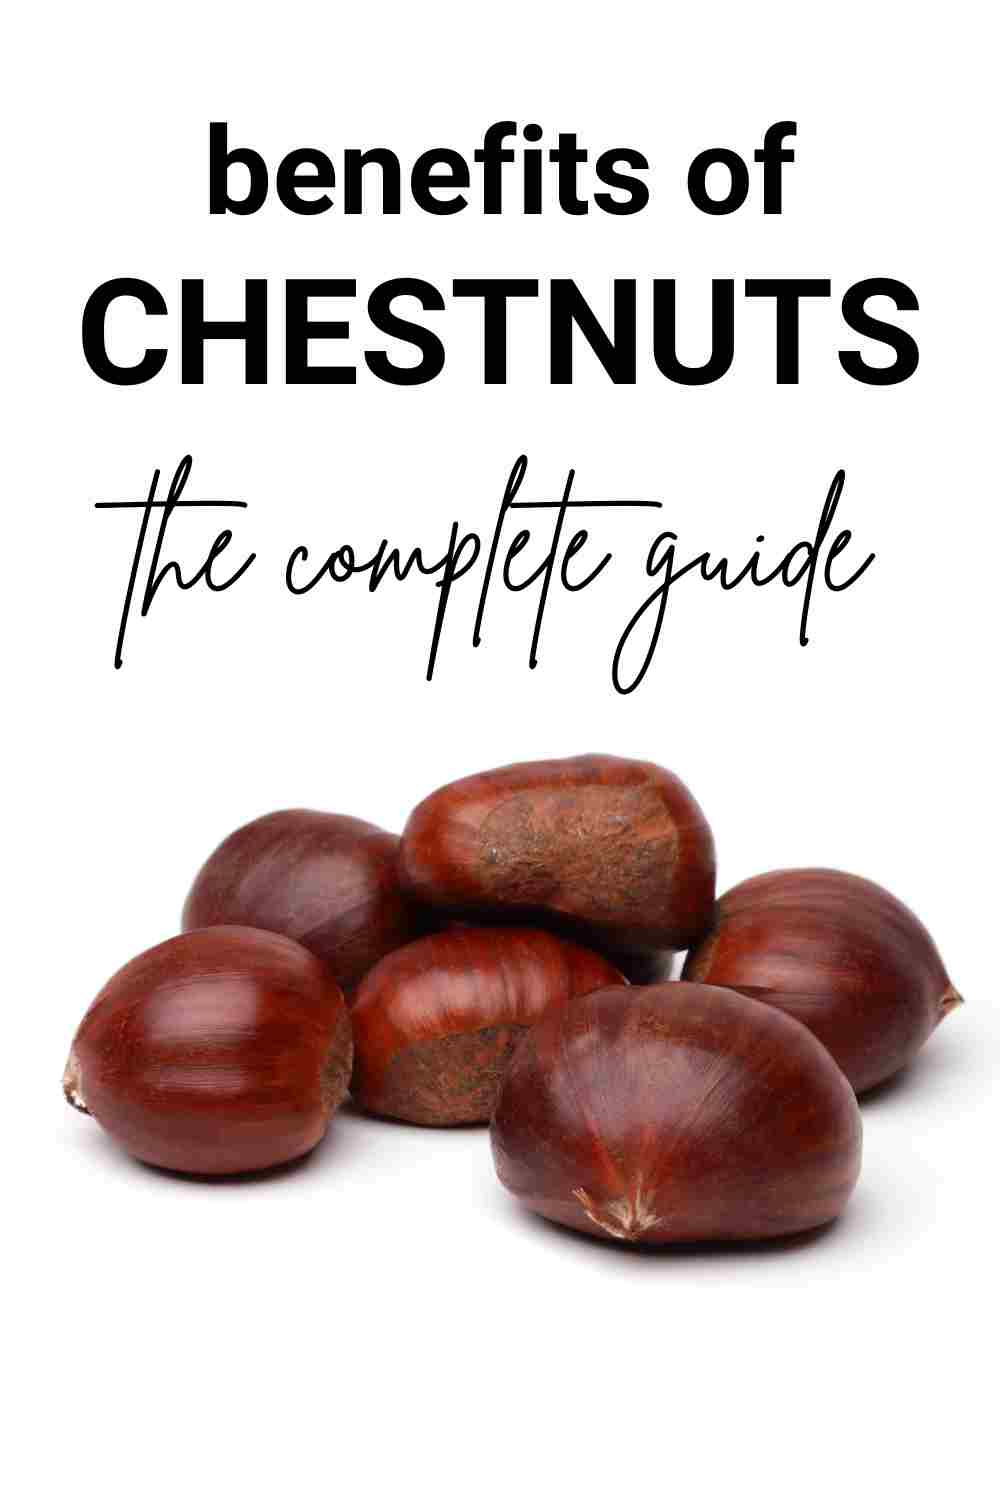 bunch of chestnuts. text reads: benefits of chestnuts, the complete guide